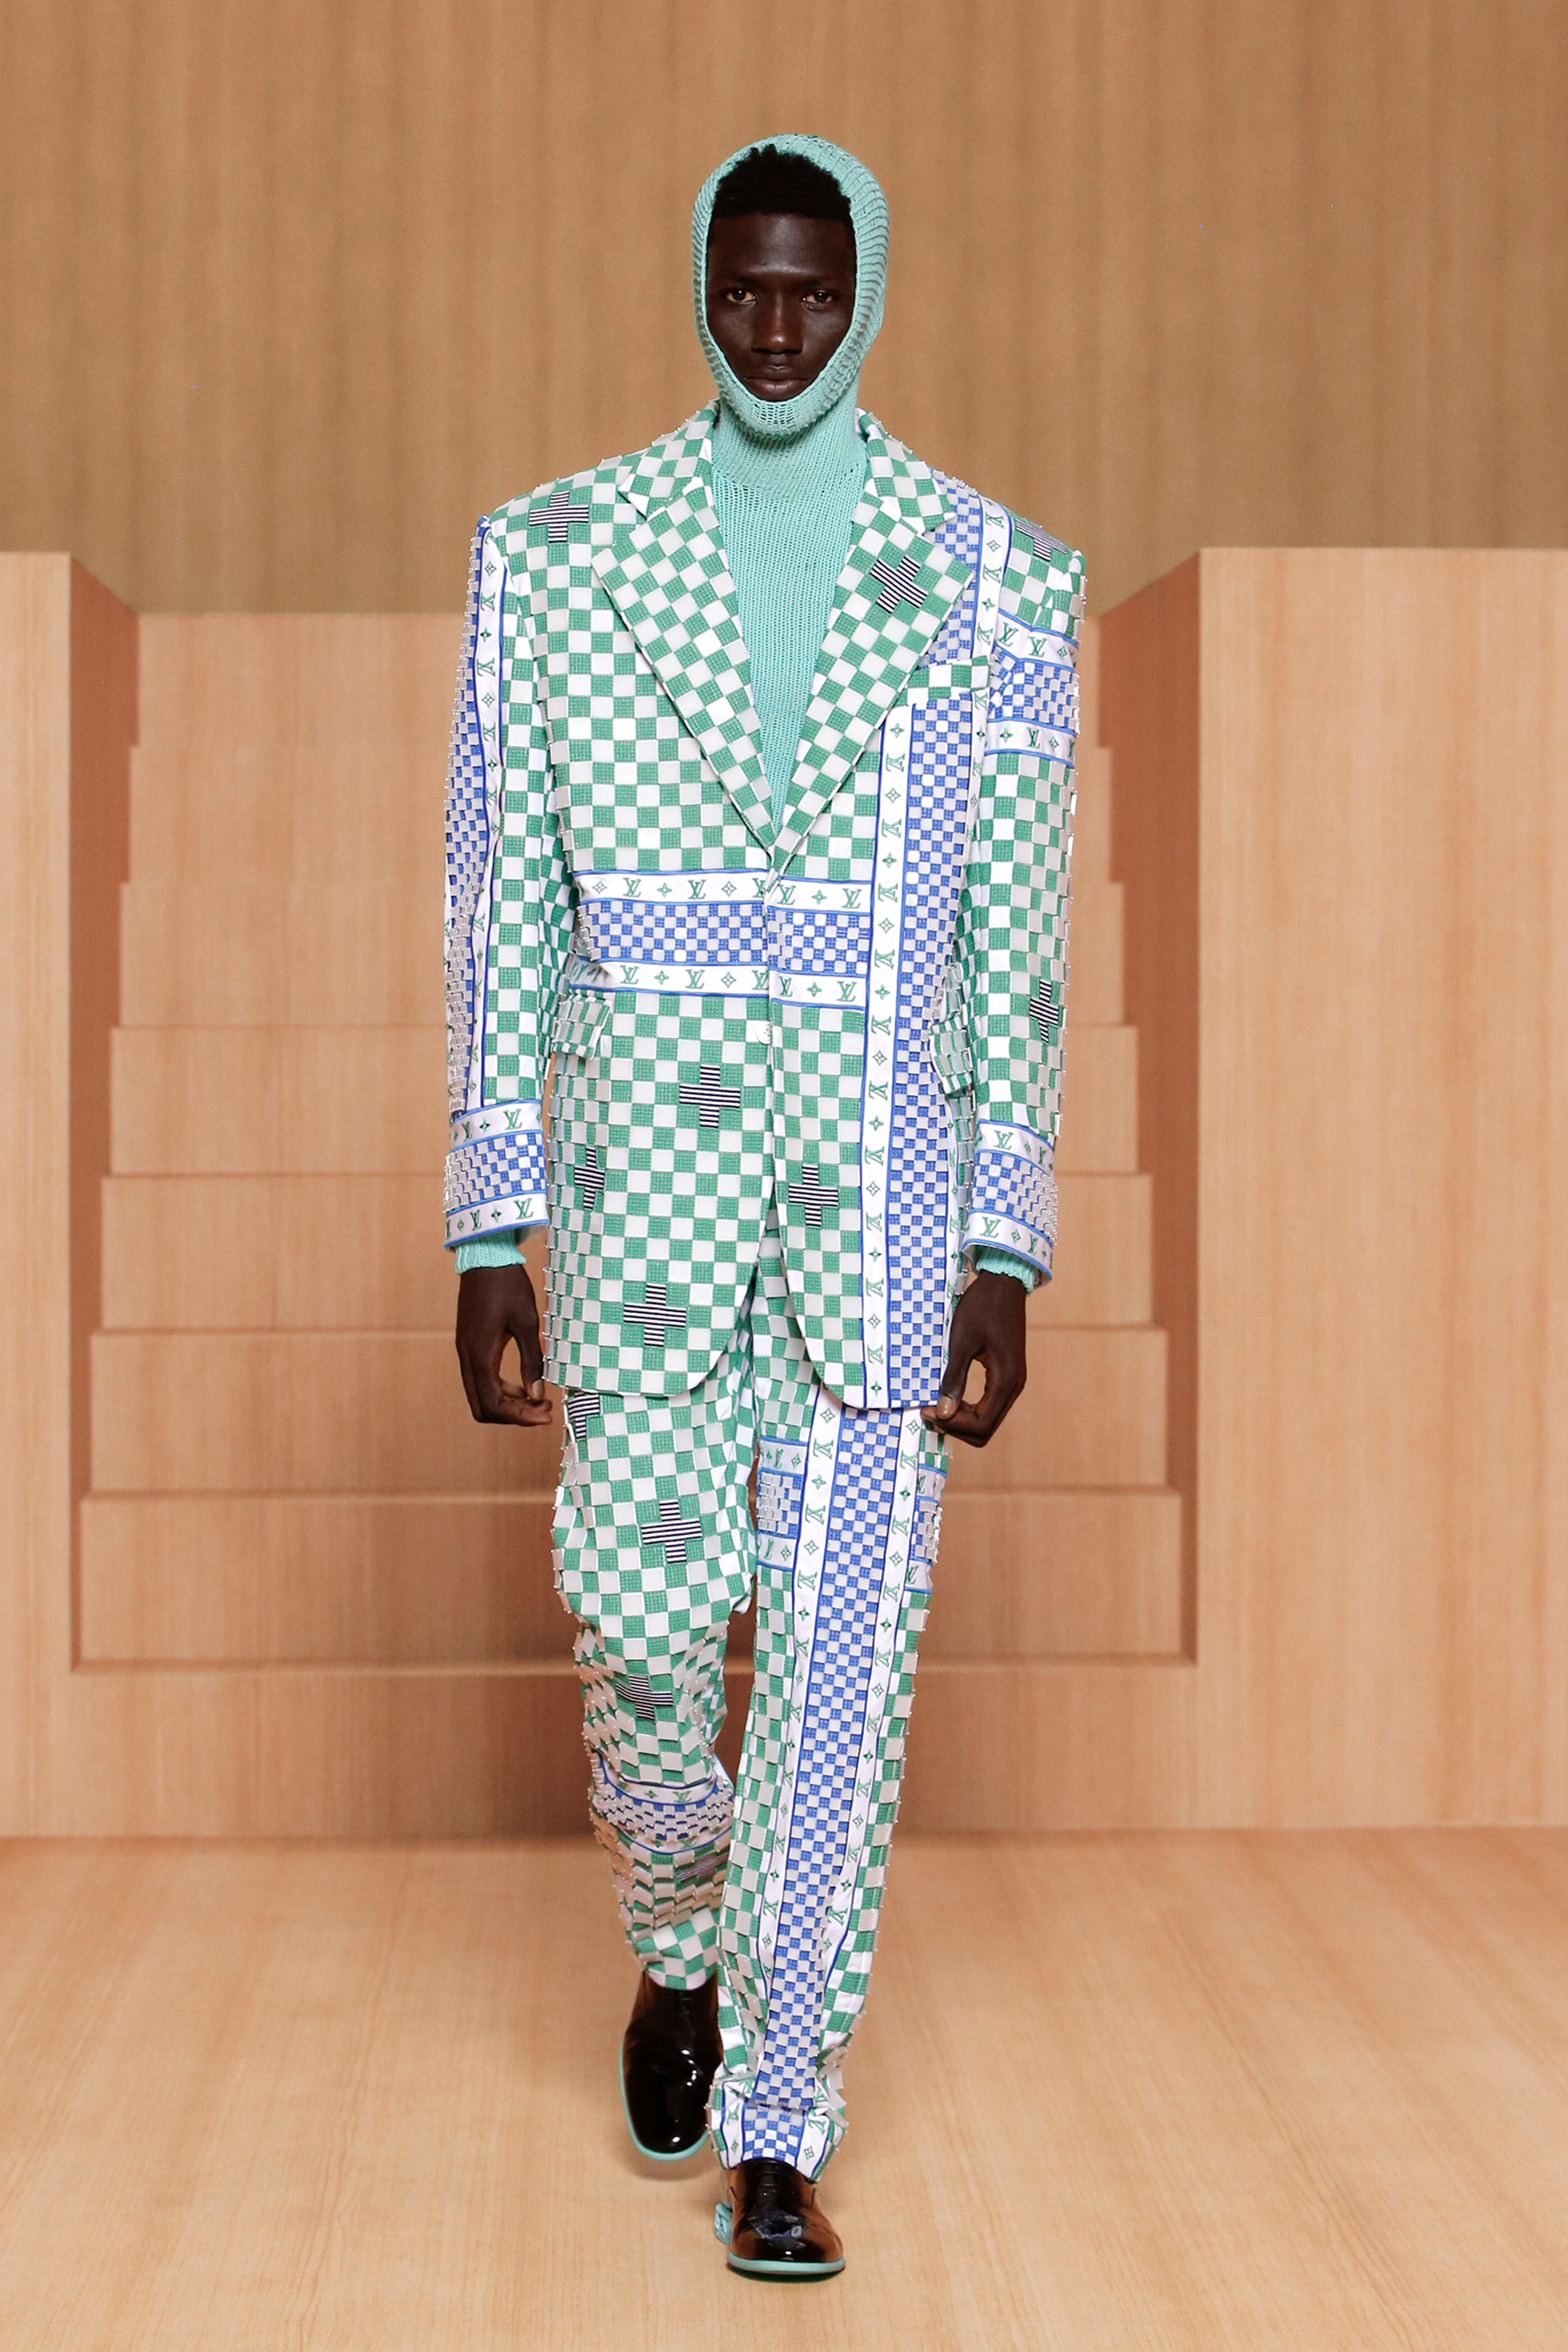 The Louis Vuitton Spring Summer 2022 Collection Casts Its Final Light -  Men's Folio